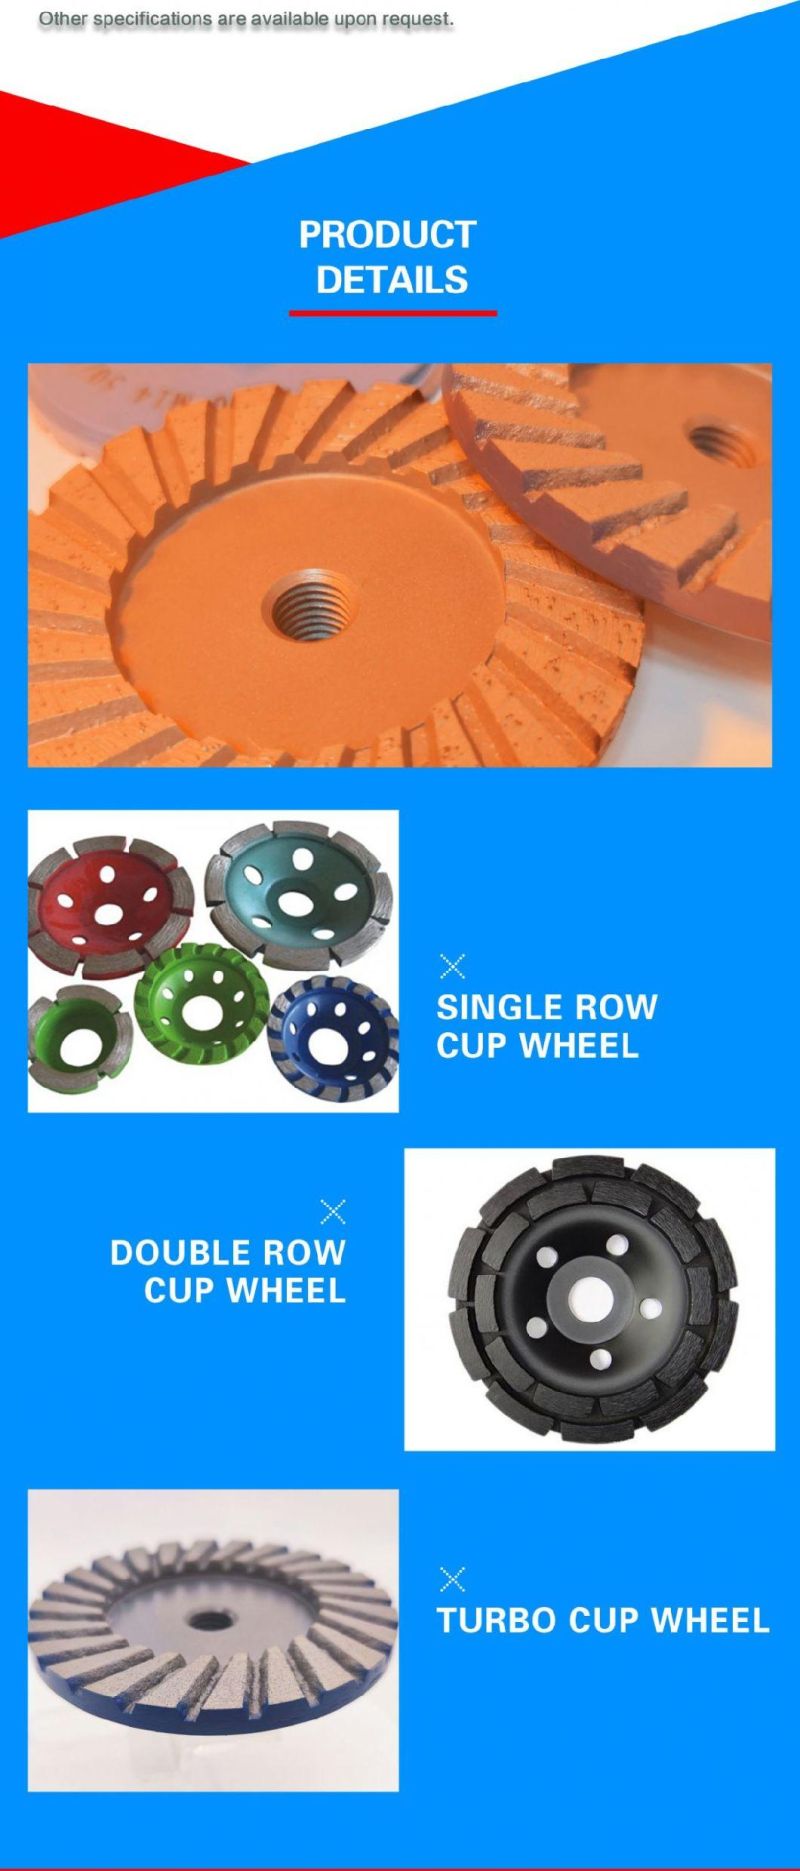 Diamond Cup Wheel for Natural Stone and Concrete Grinding Tools